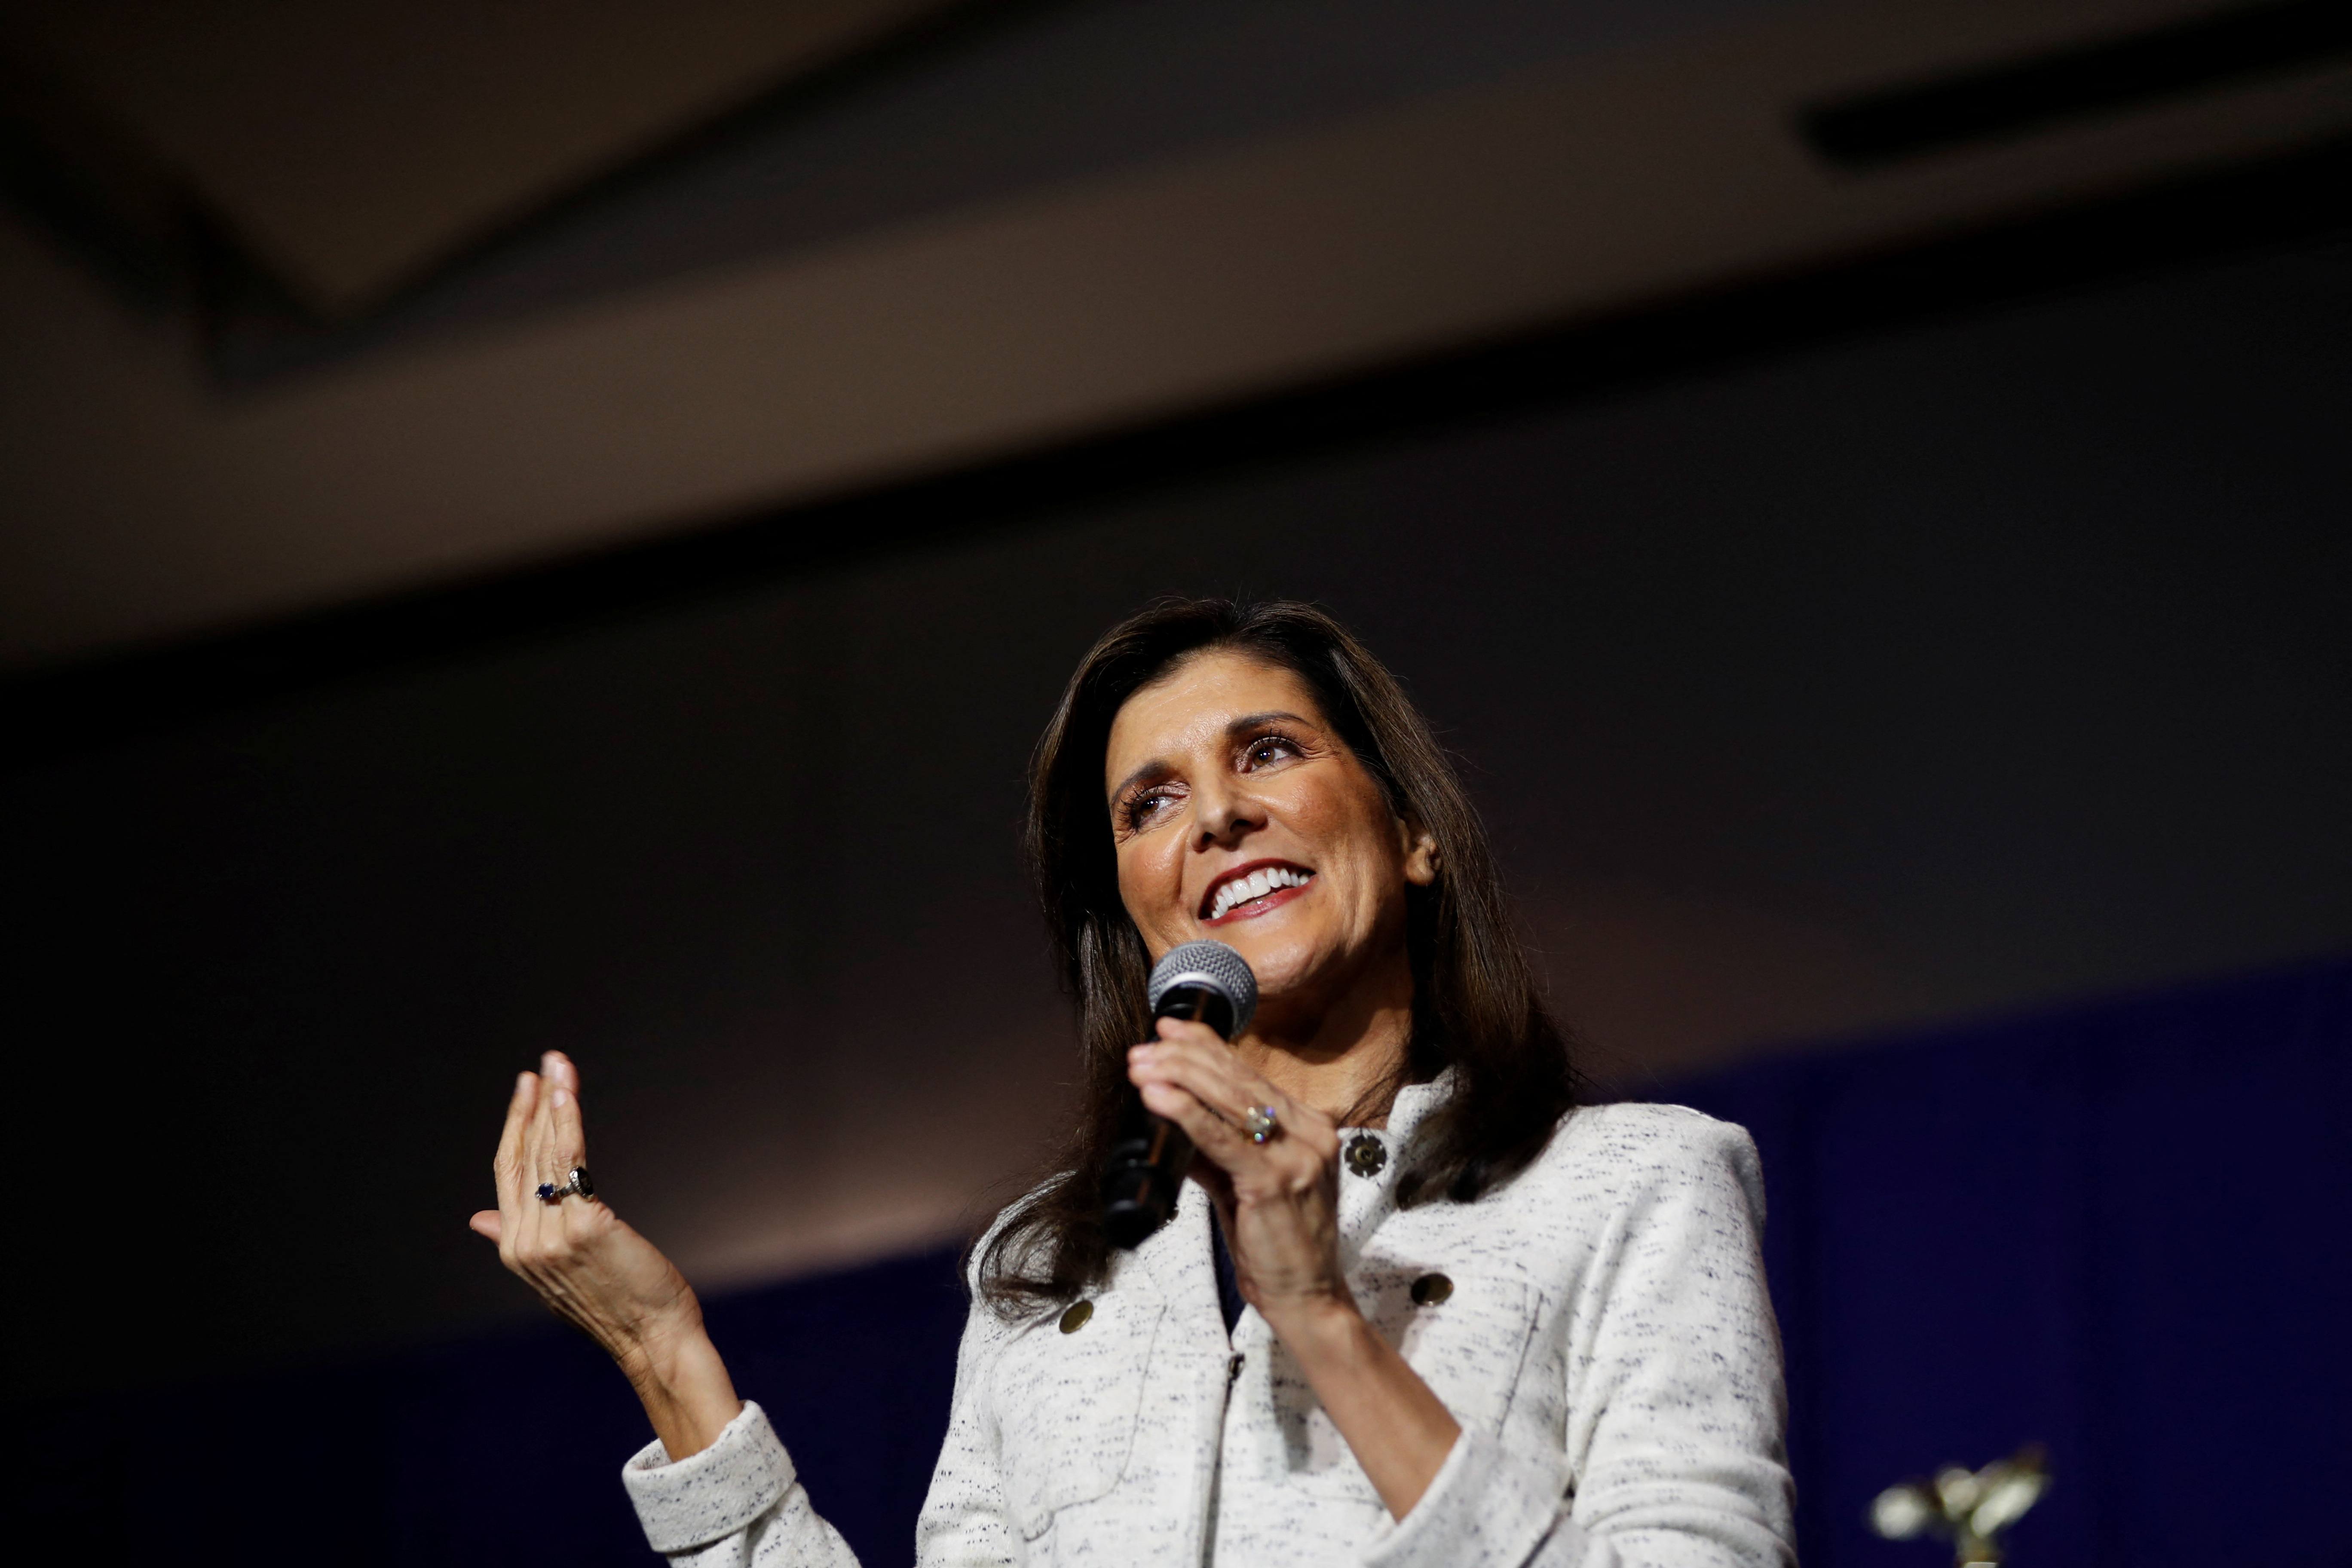 Nikki Haley speaks at a campaign event in South Carolina, standing at a podium with a microphone in front of an American flag backdrop.